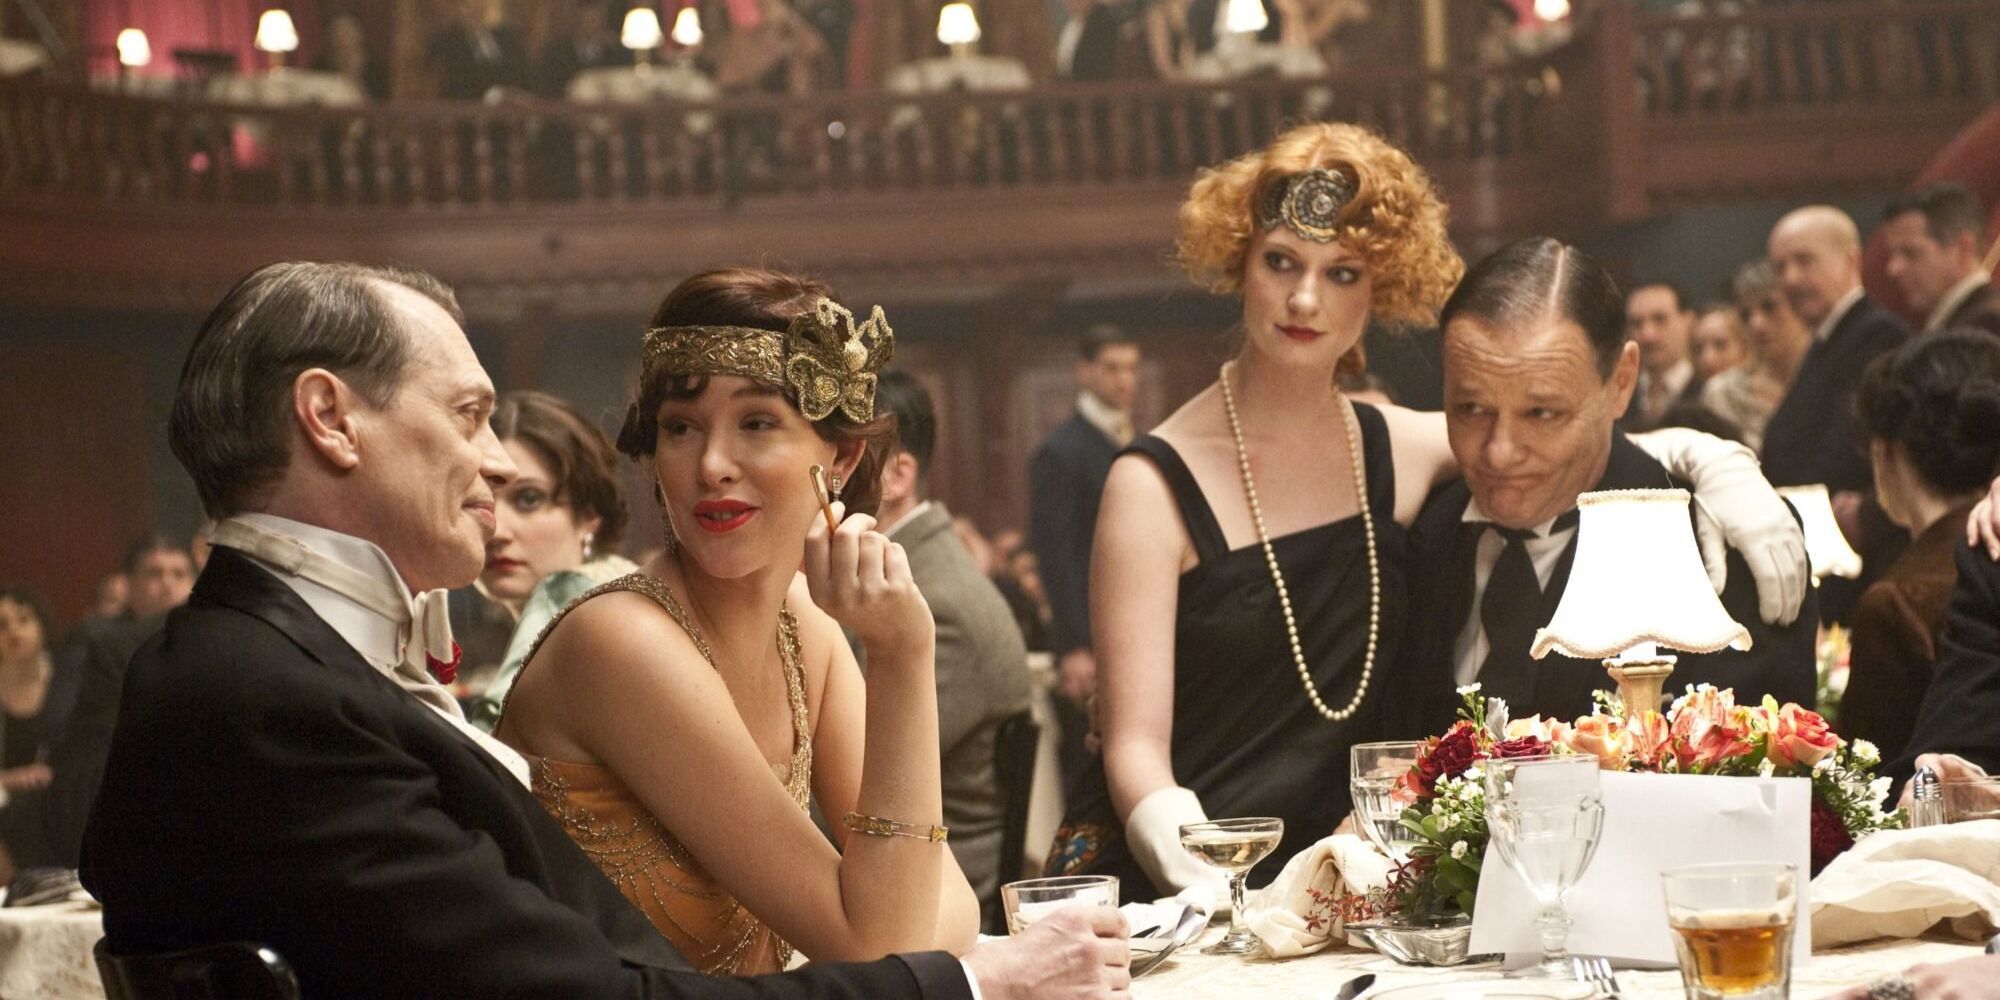 Nucky (Steve Buscemi) at dinner with freinds in Boardwalk Empire